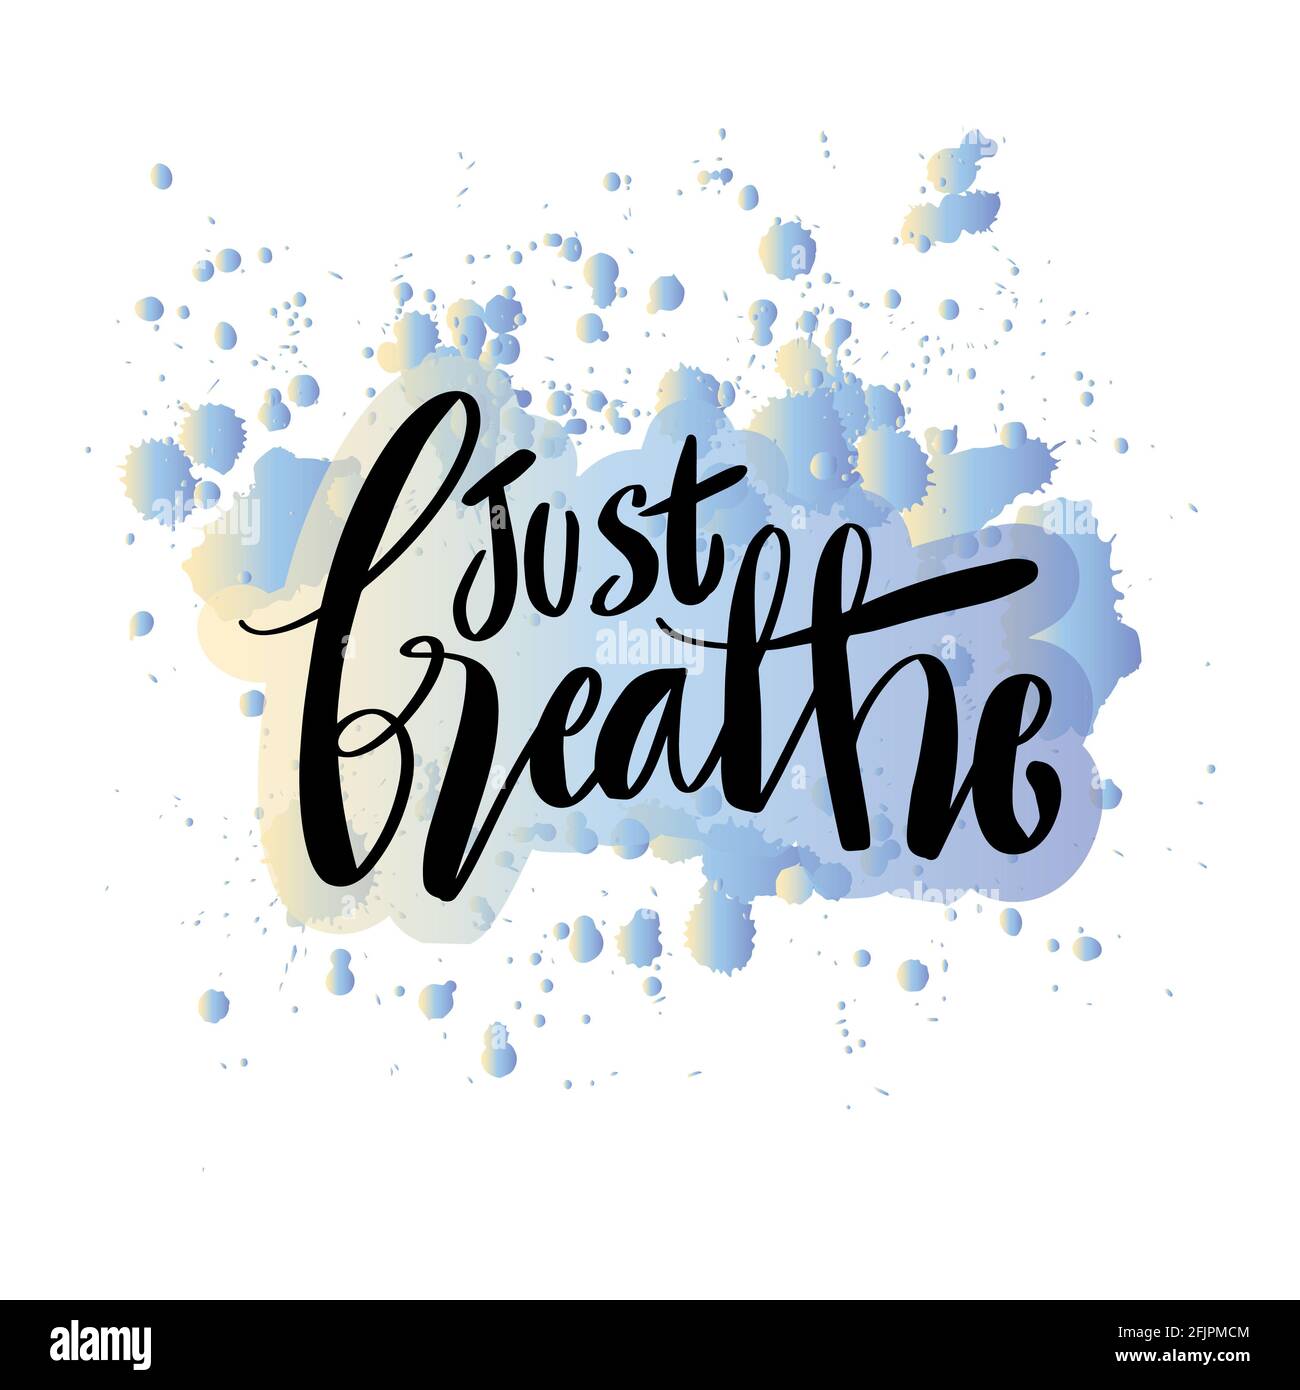 Just Breathe. Hand lettering. Inspirational typography. Stock Photo